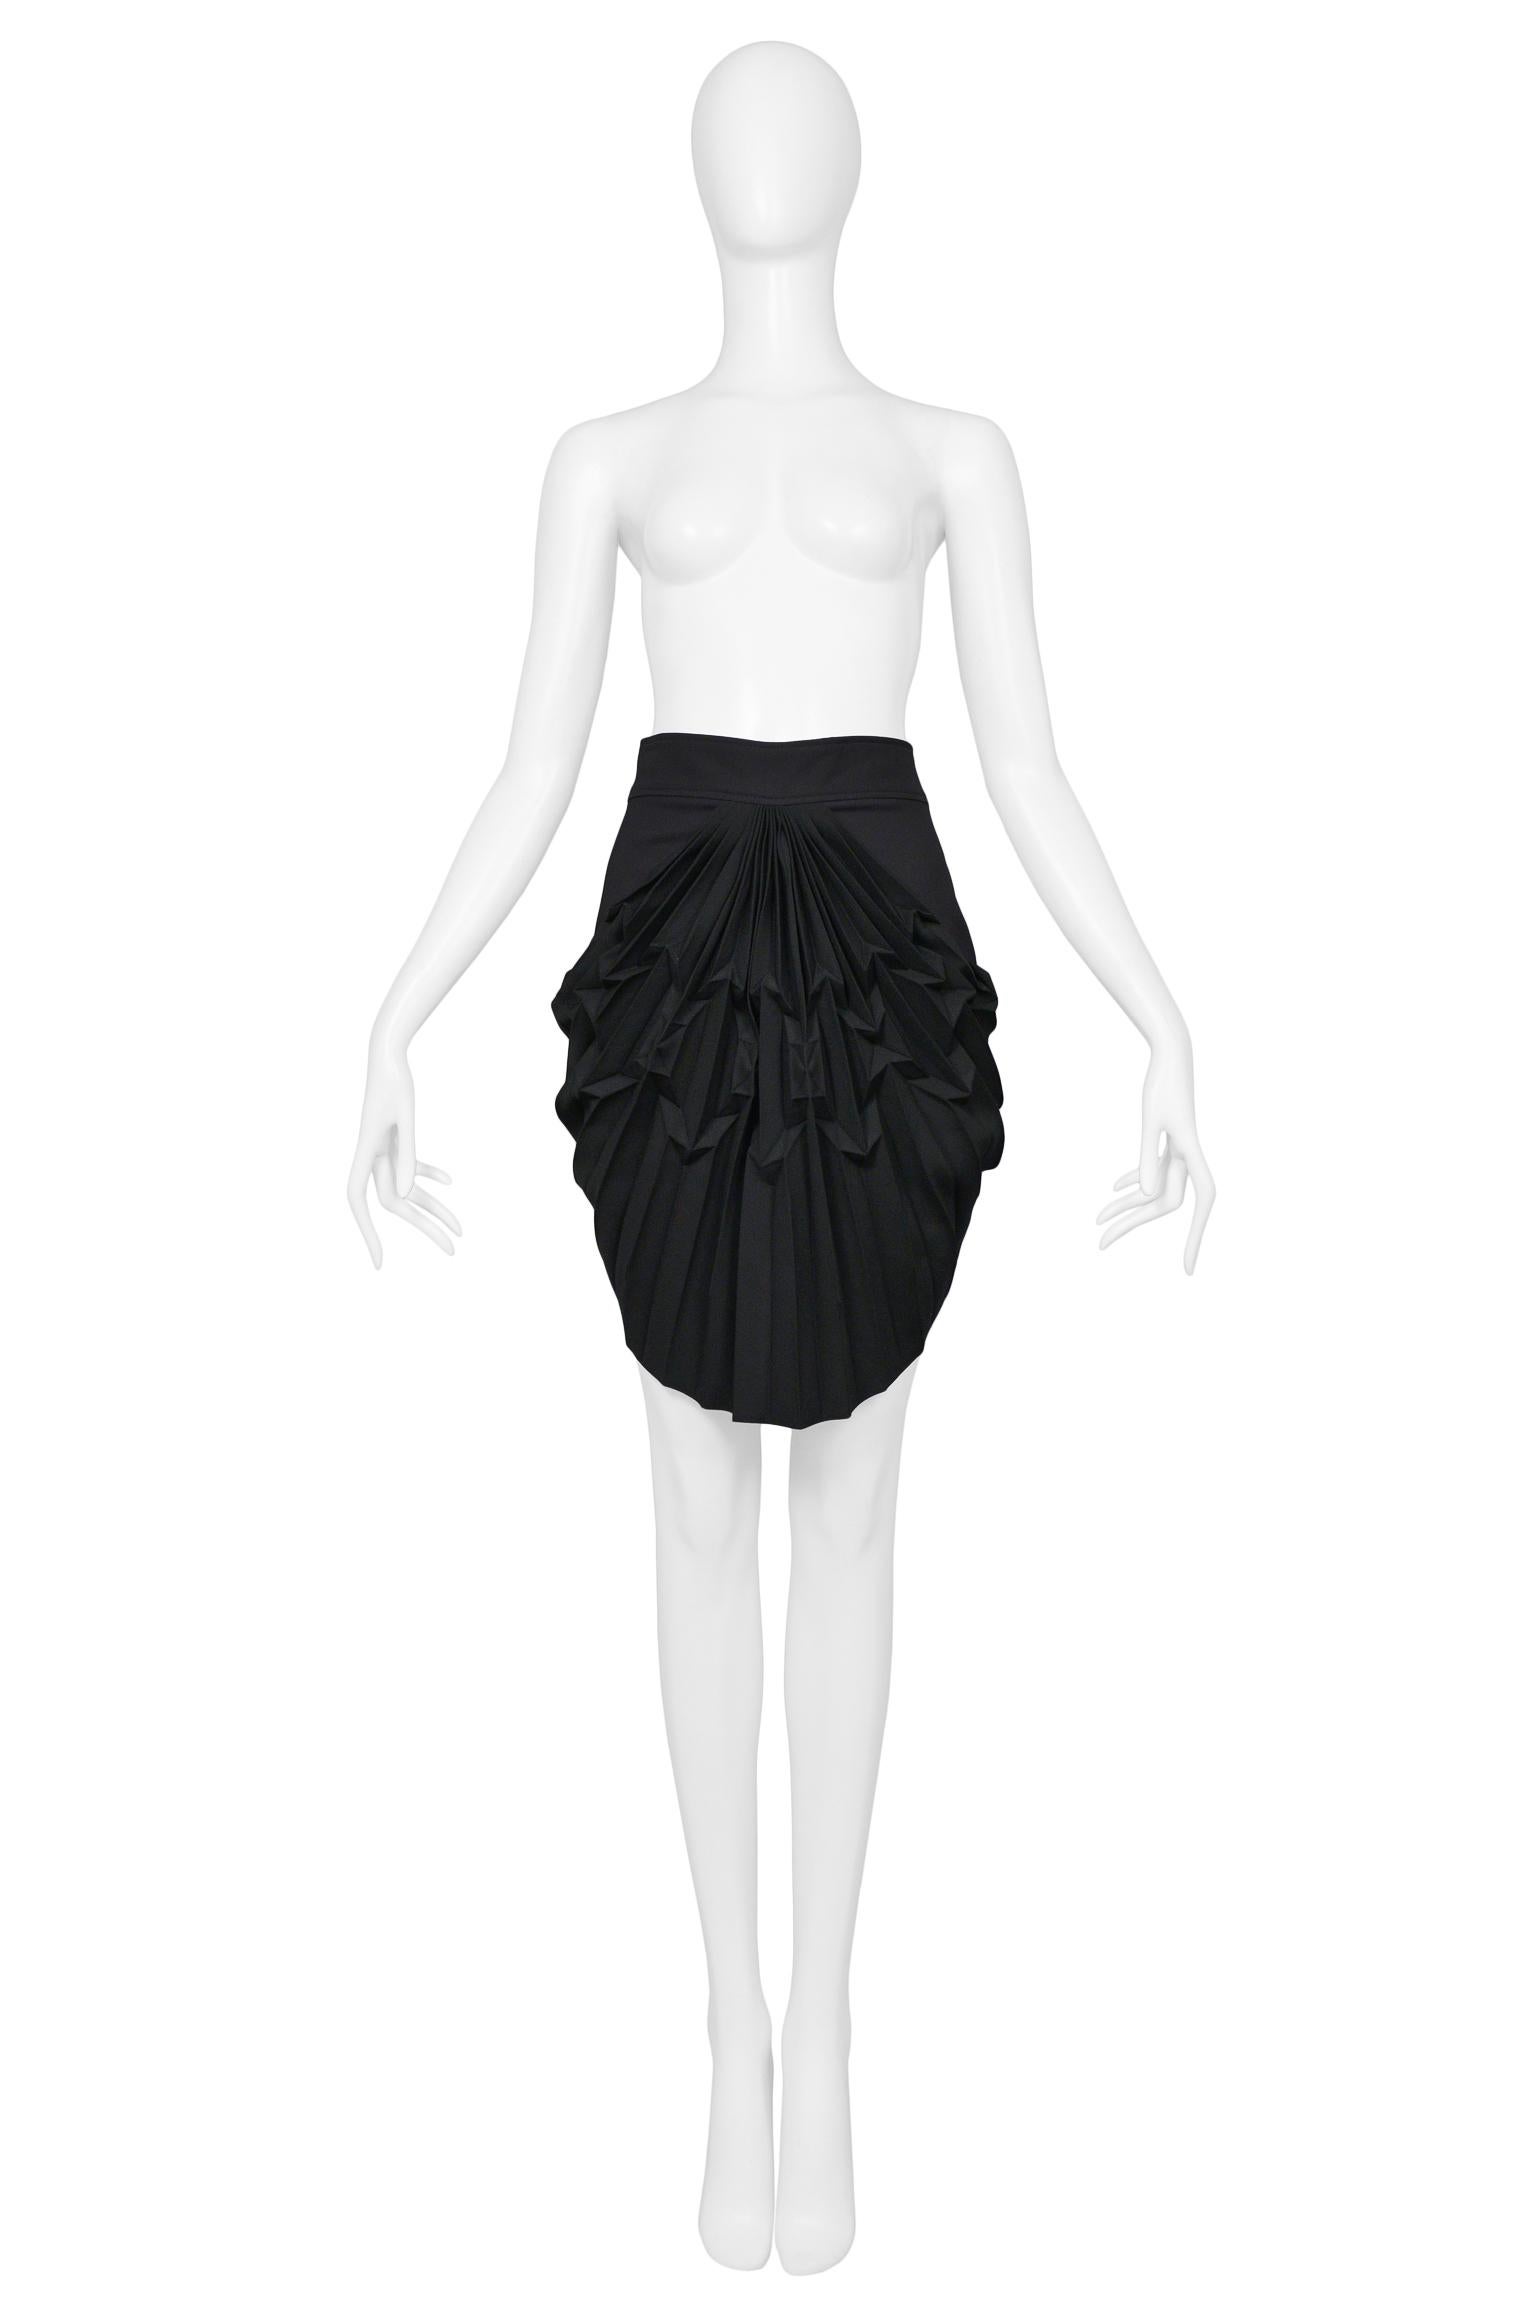 Balenciaga by Ghesquiere Black Asymmetrical Pleated Mini Skirt 2003 In Excellent Condition For Sale In Los Angeles, CA